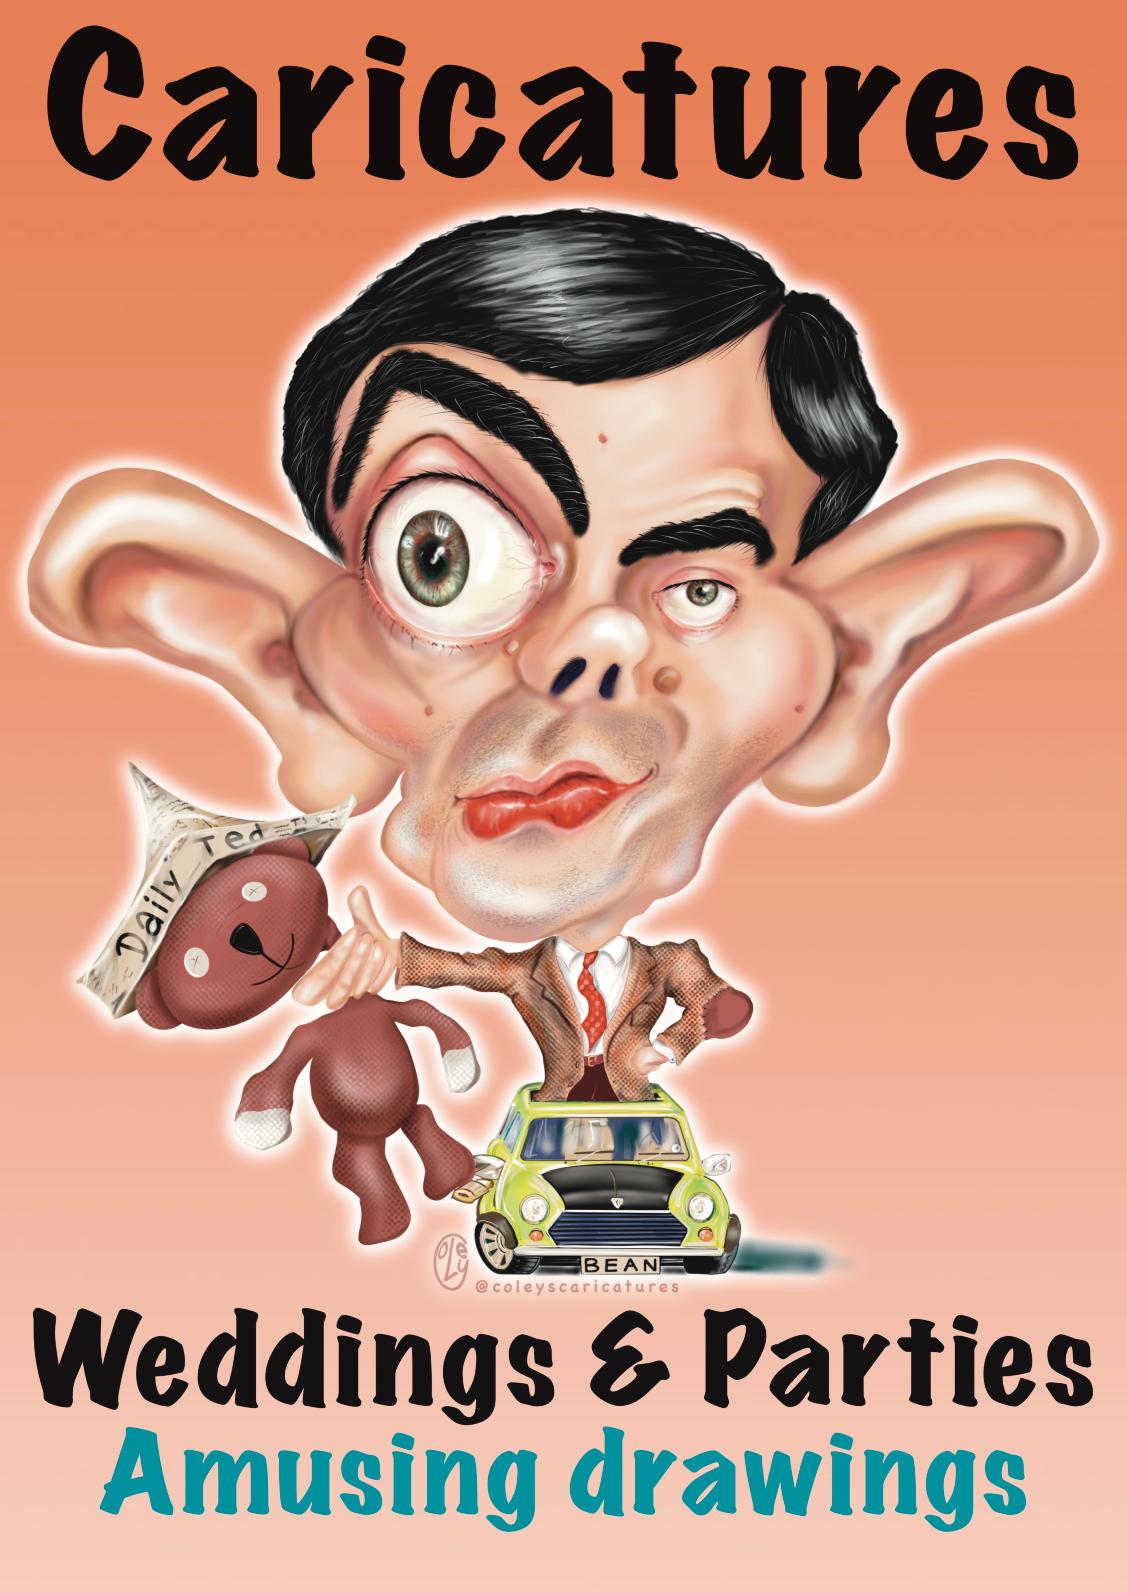 Mr Bean logo for Coley's caricatures 